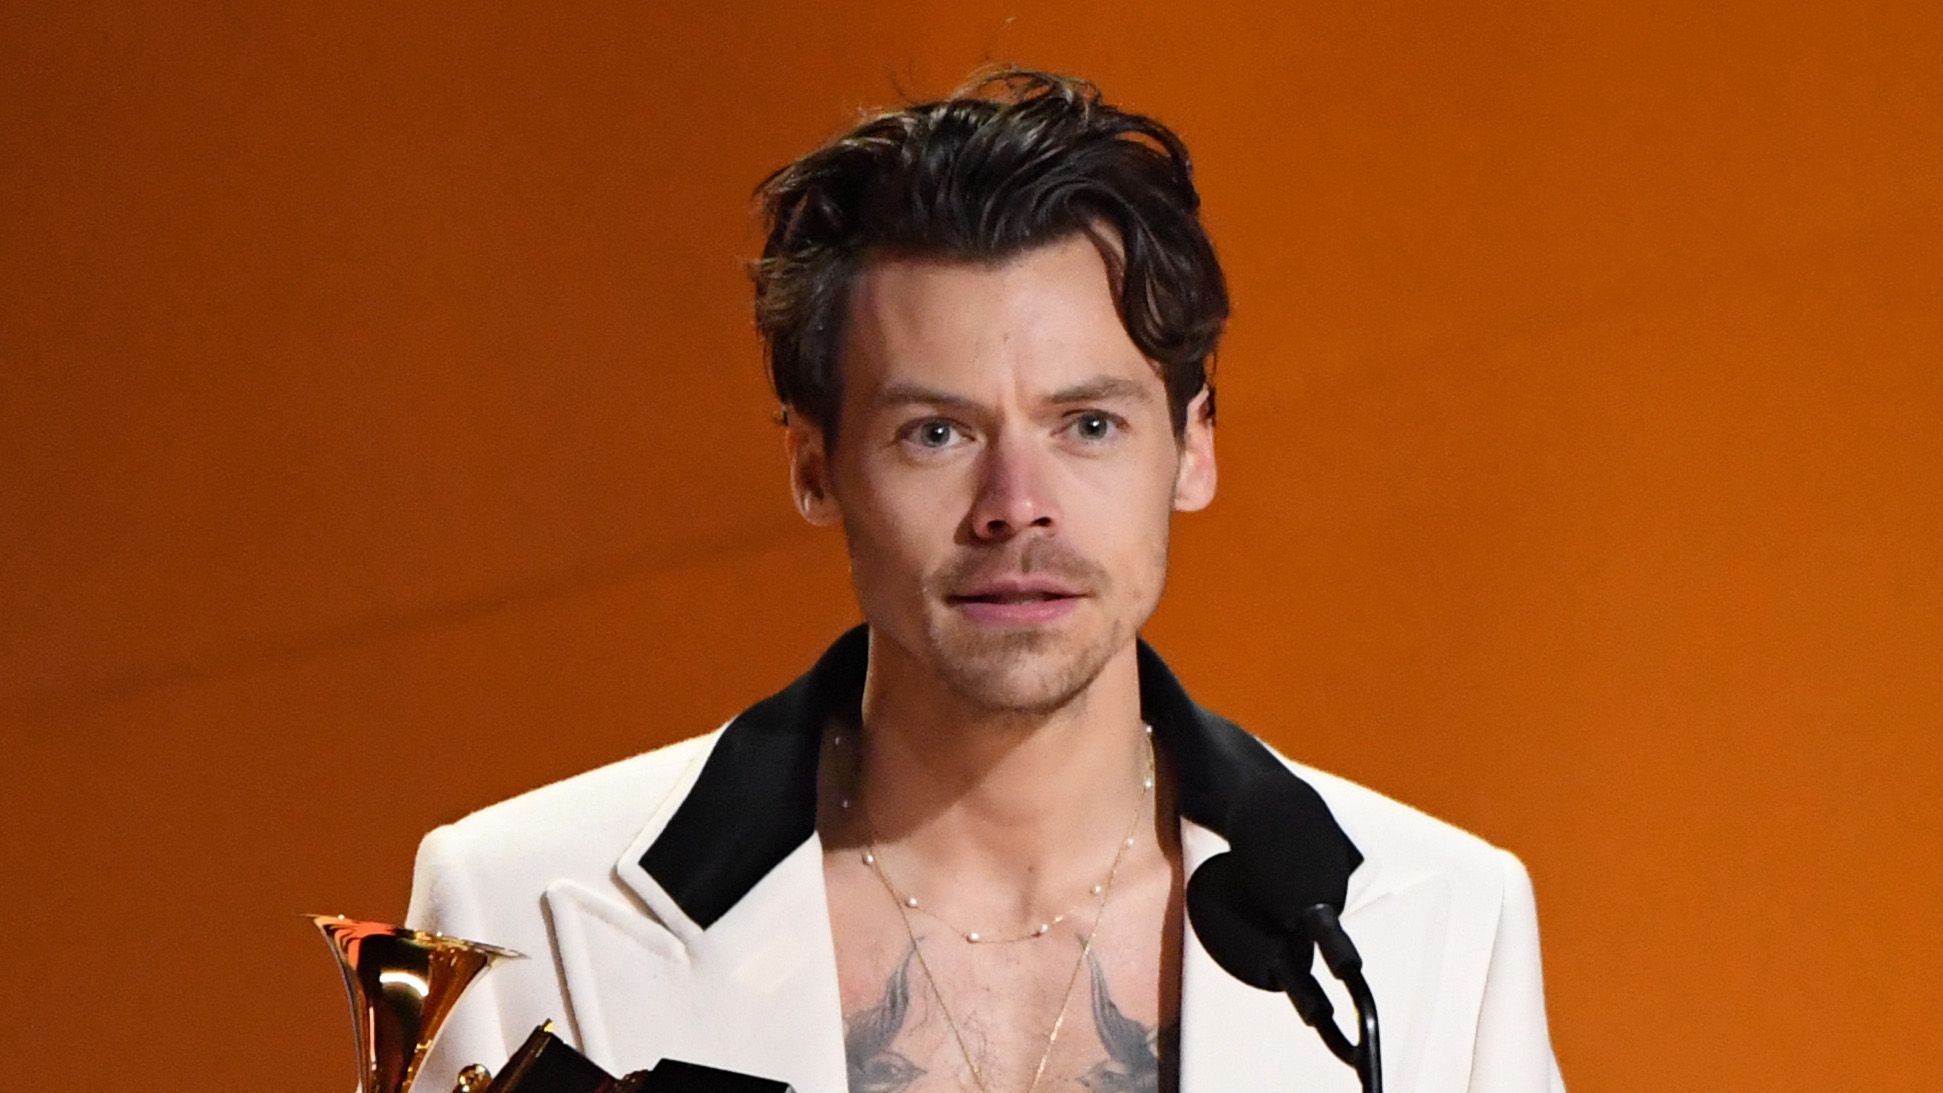 https://hips.hearstapps.com/hmg-prod/images/harry-styles-accepts-the-best-pop-vocal-album-award-for-news-photo-1684349114.jpg?crop=1xw:0.37494xh;center,top